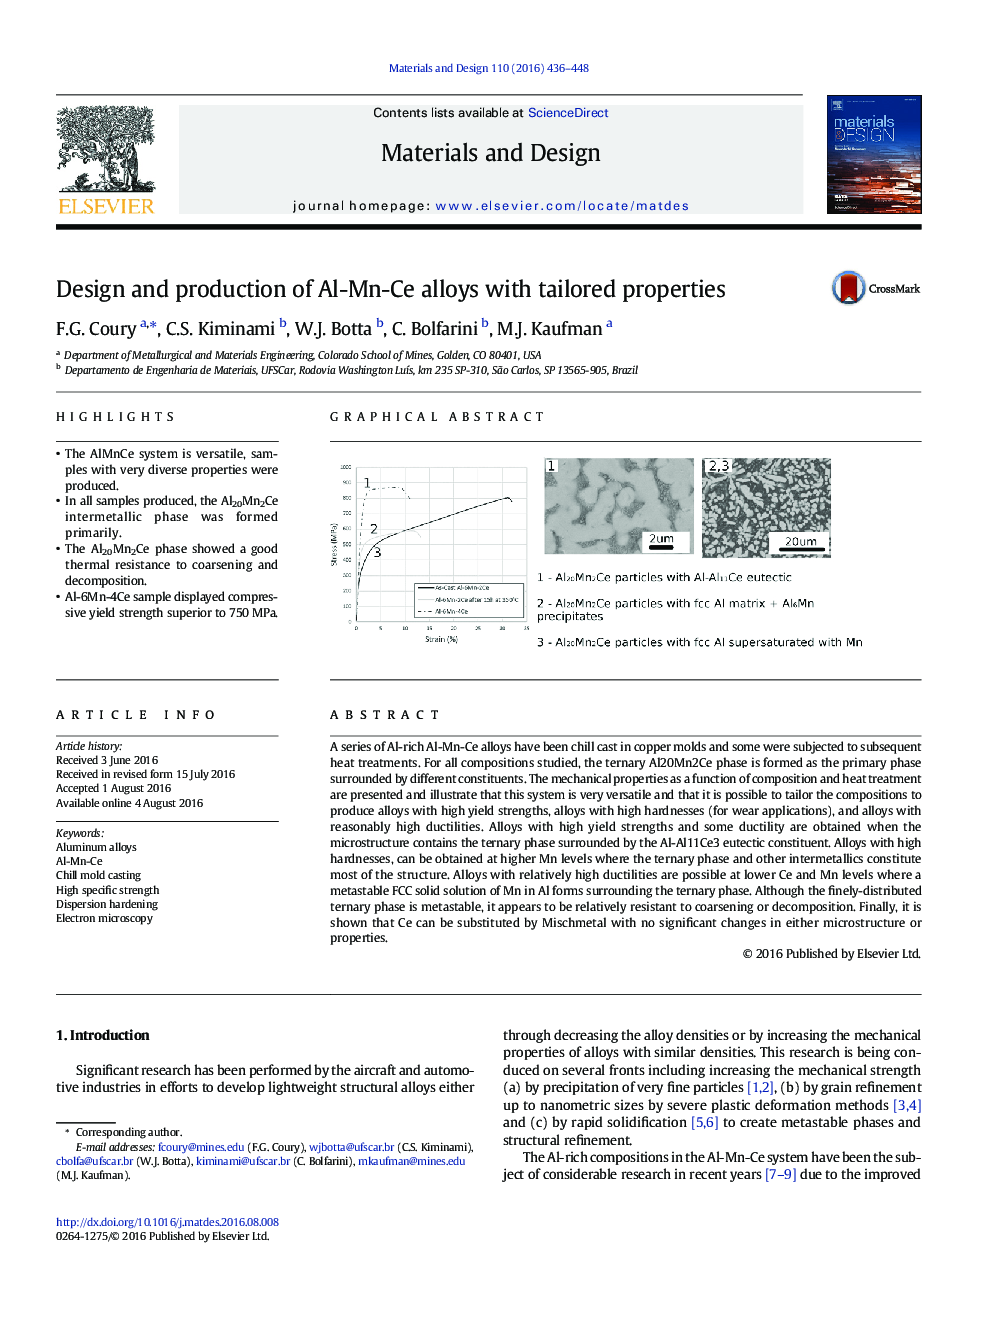 Design and production of Al-Mn-Ce alloys with tailored properties